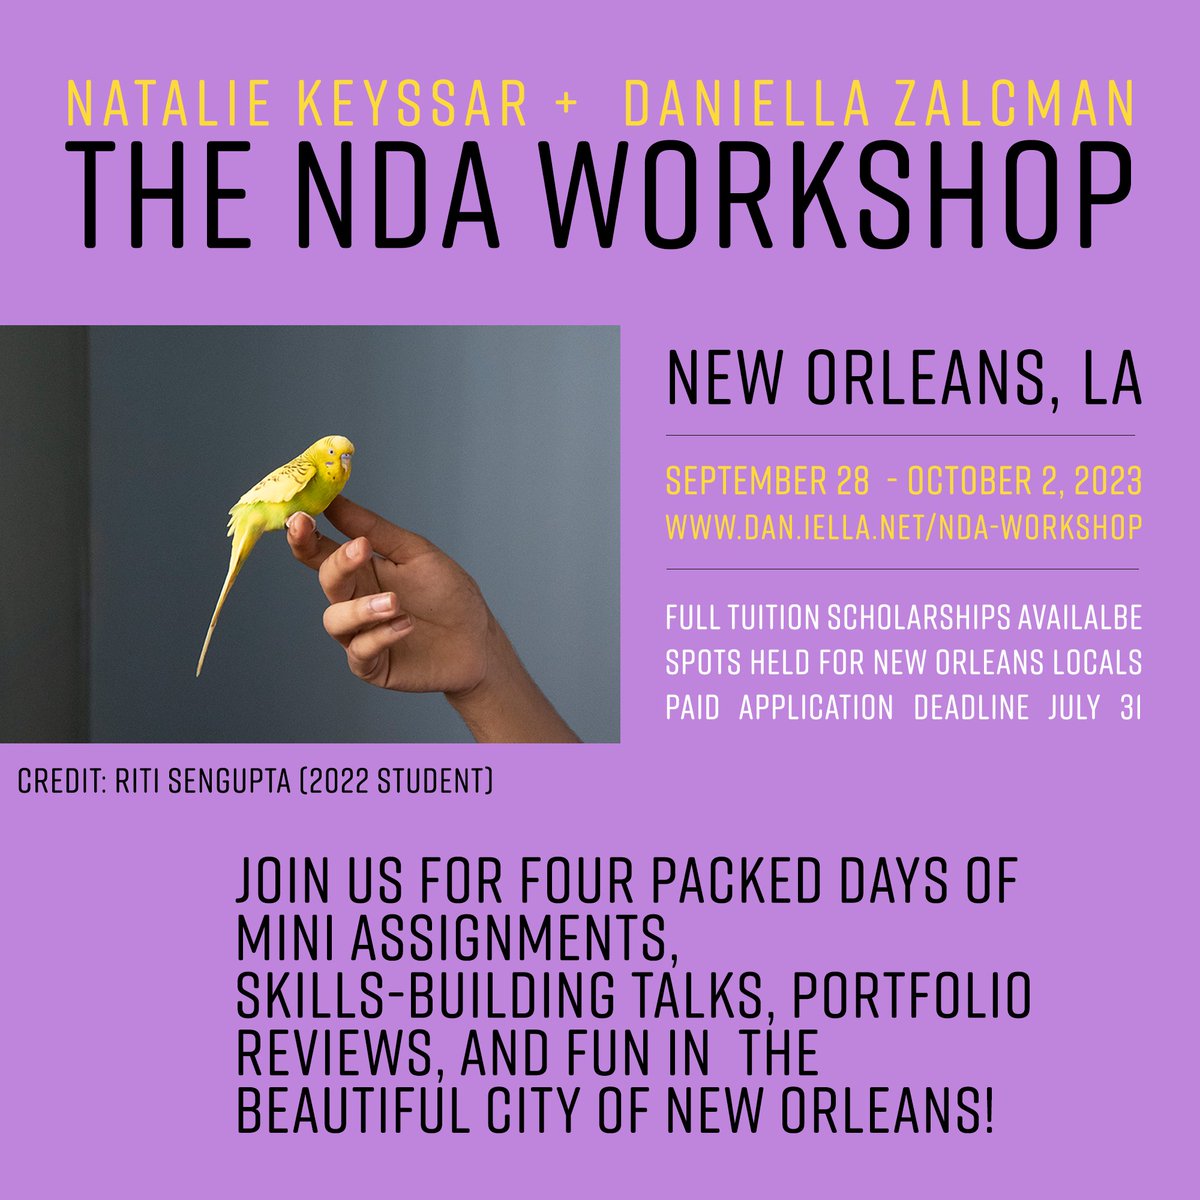 FRIENDS! My sister in mischief @nataliekeyssar and I are hosting our FIRST EVER IN PERSON WORKSHOP in the beautiful city of New Orleans this fall. Join us for a packed four day weekend of assignments, talks, portfolio reviews, and most importantly — fun! dan.iella.net/nda-workshop